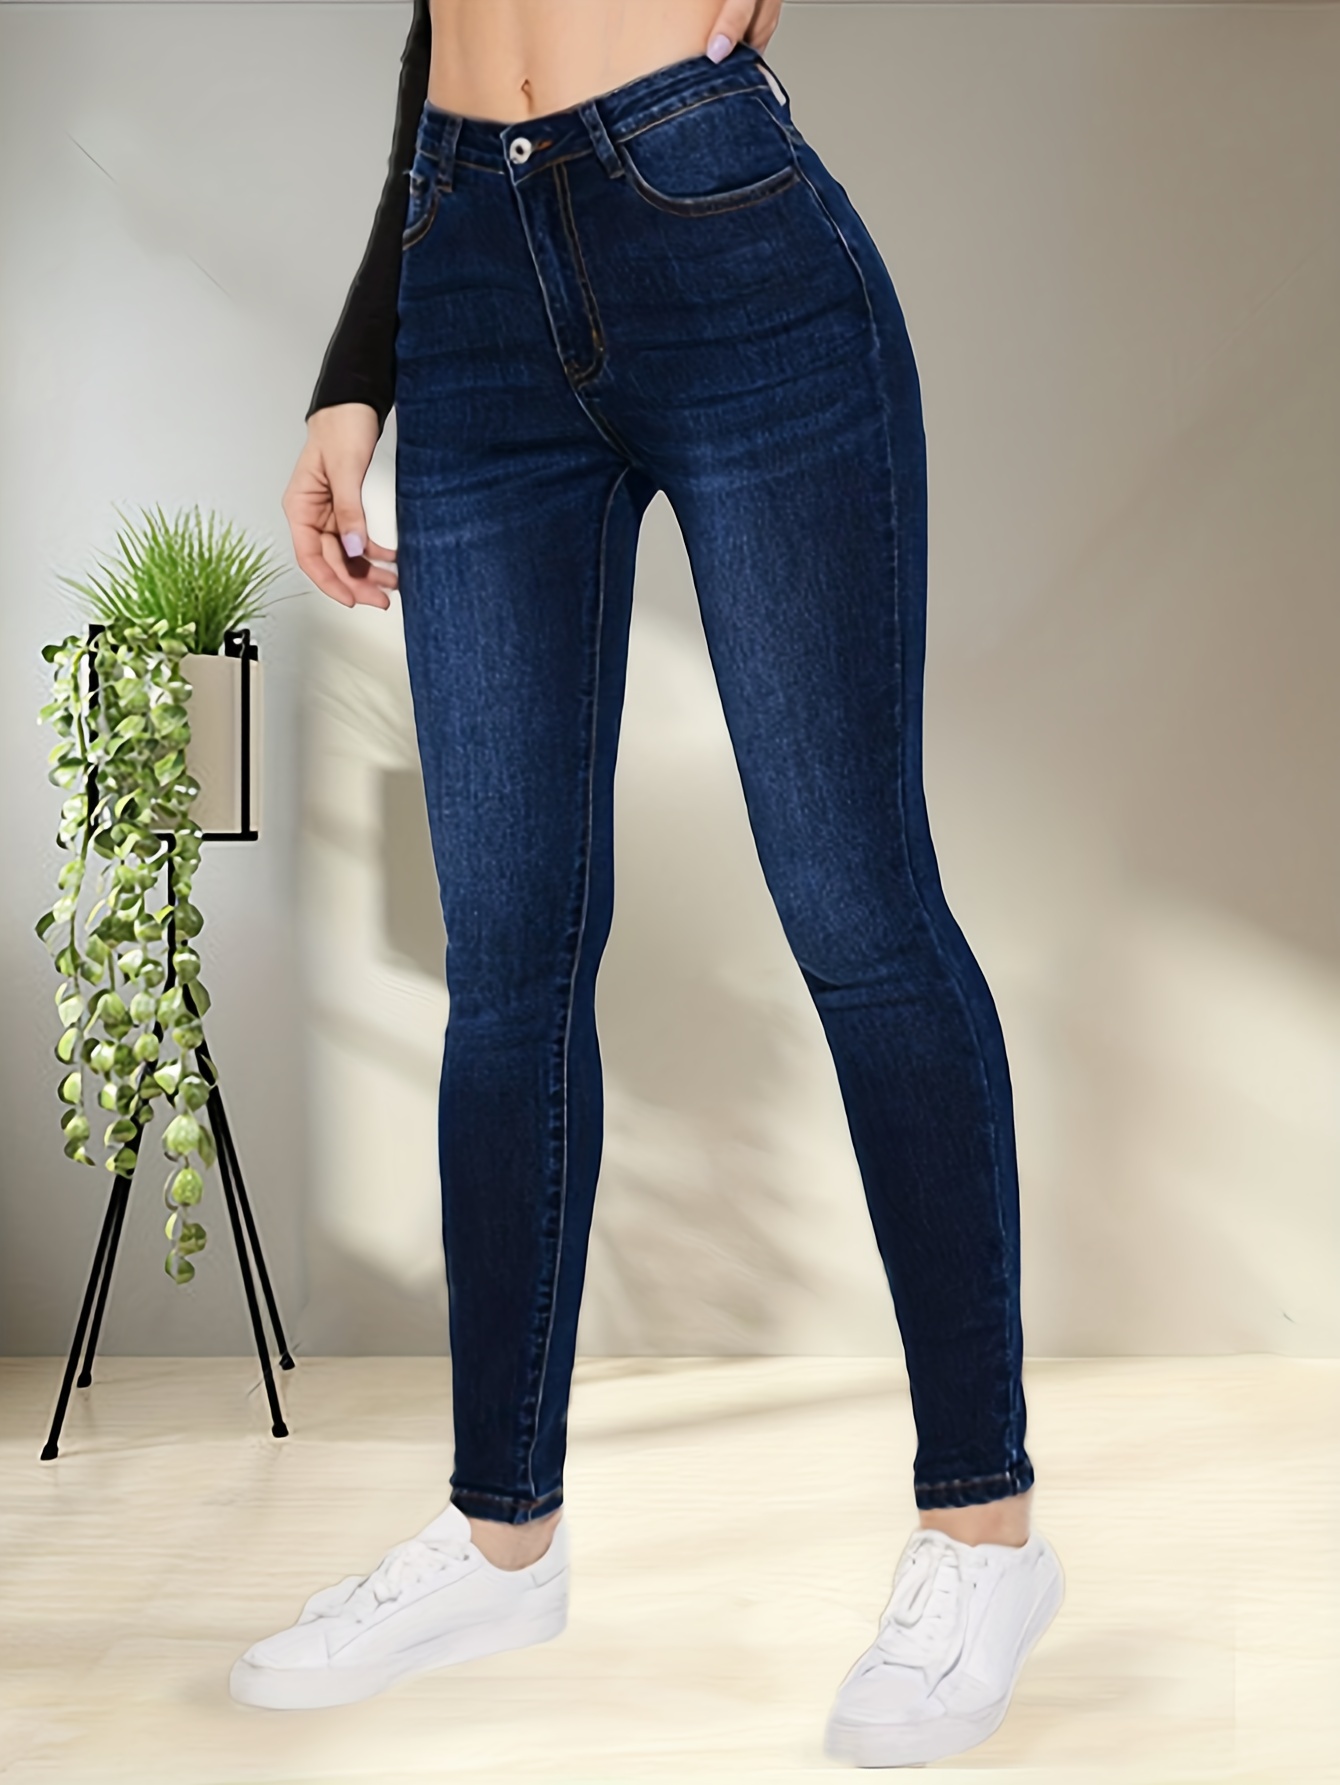 Blue High Stretch Skinny Jeans, Slim Fit Slant Pockets Casual Tight Jeans,  Women's Denim Jeans & Clothing